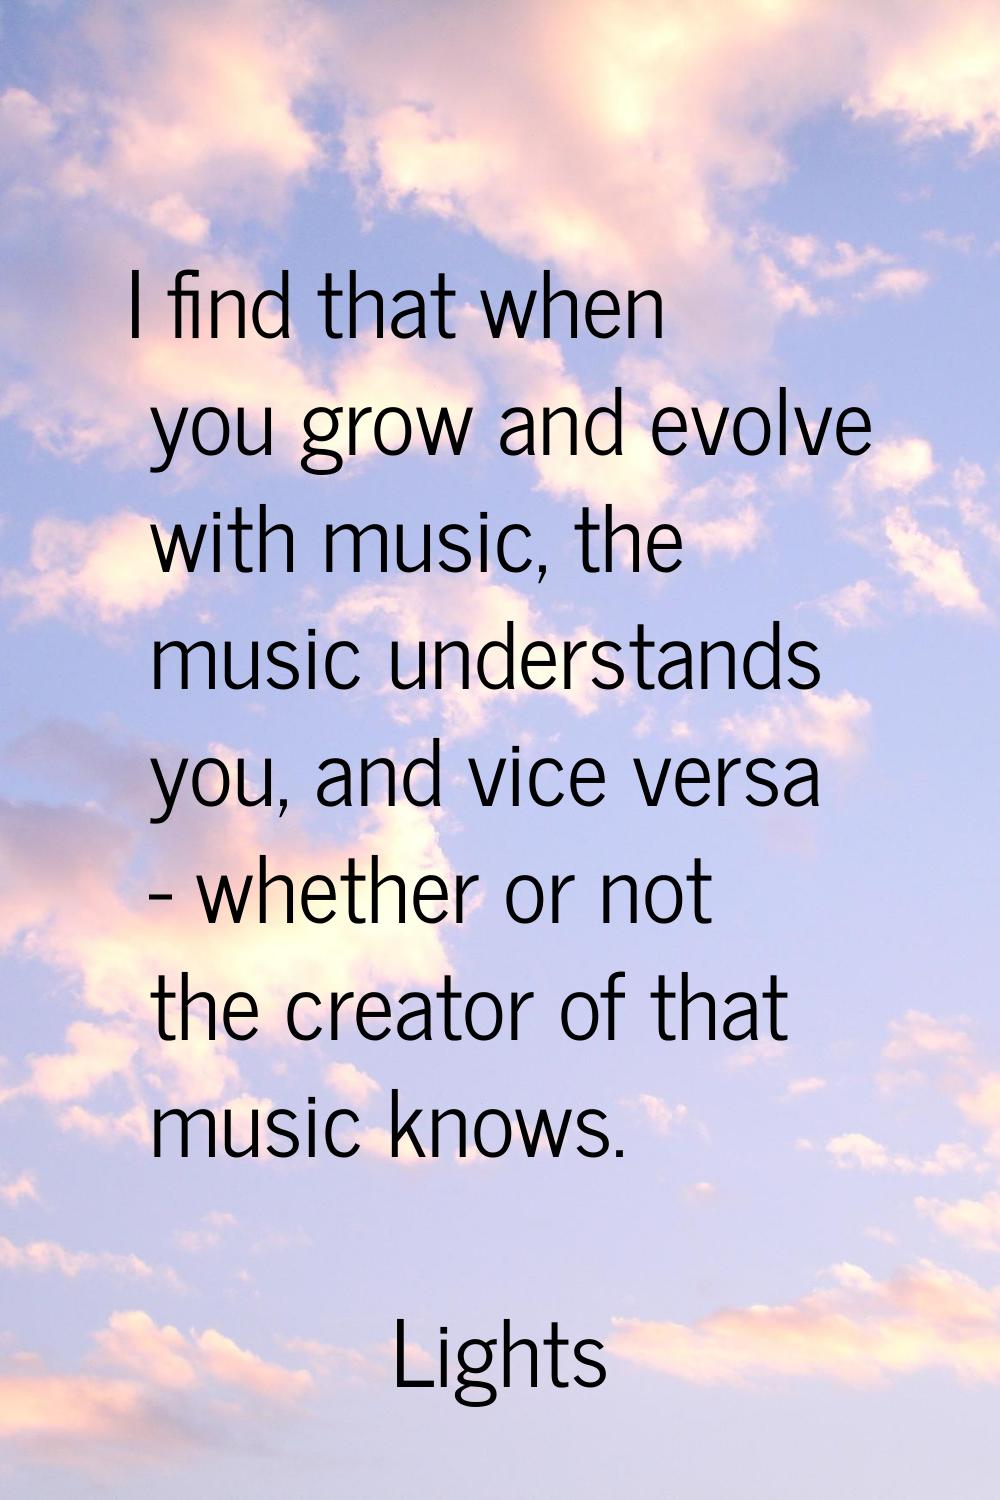 I find that when you grow and evolve with music, the music understands you, and vice versa - whethe